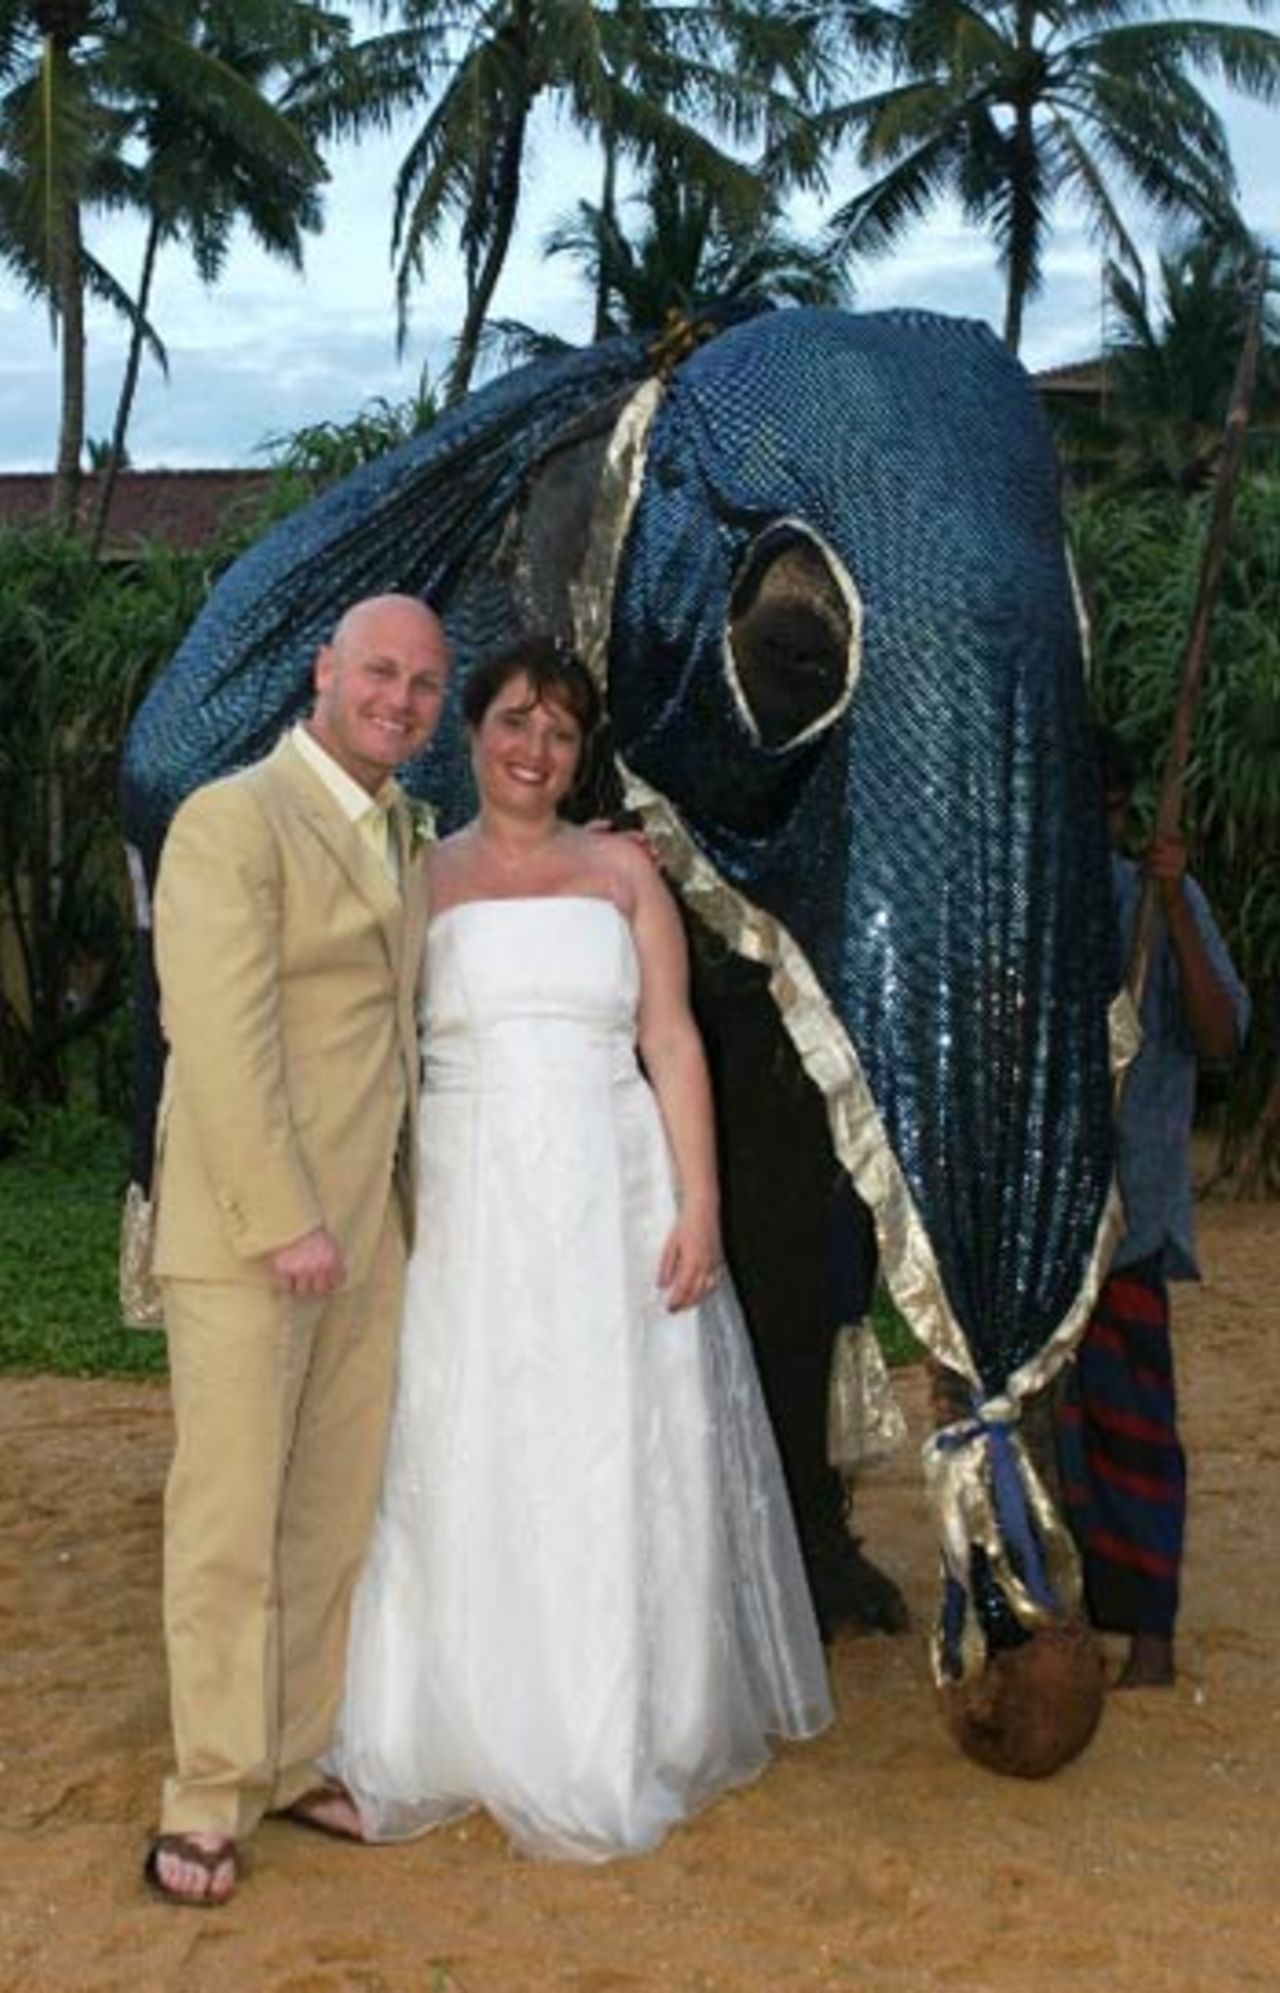 David Nash gets married on a beach in Galle, December 21, 2007